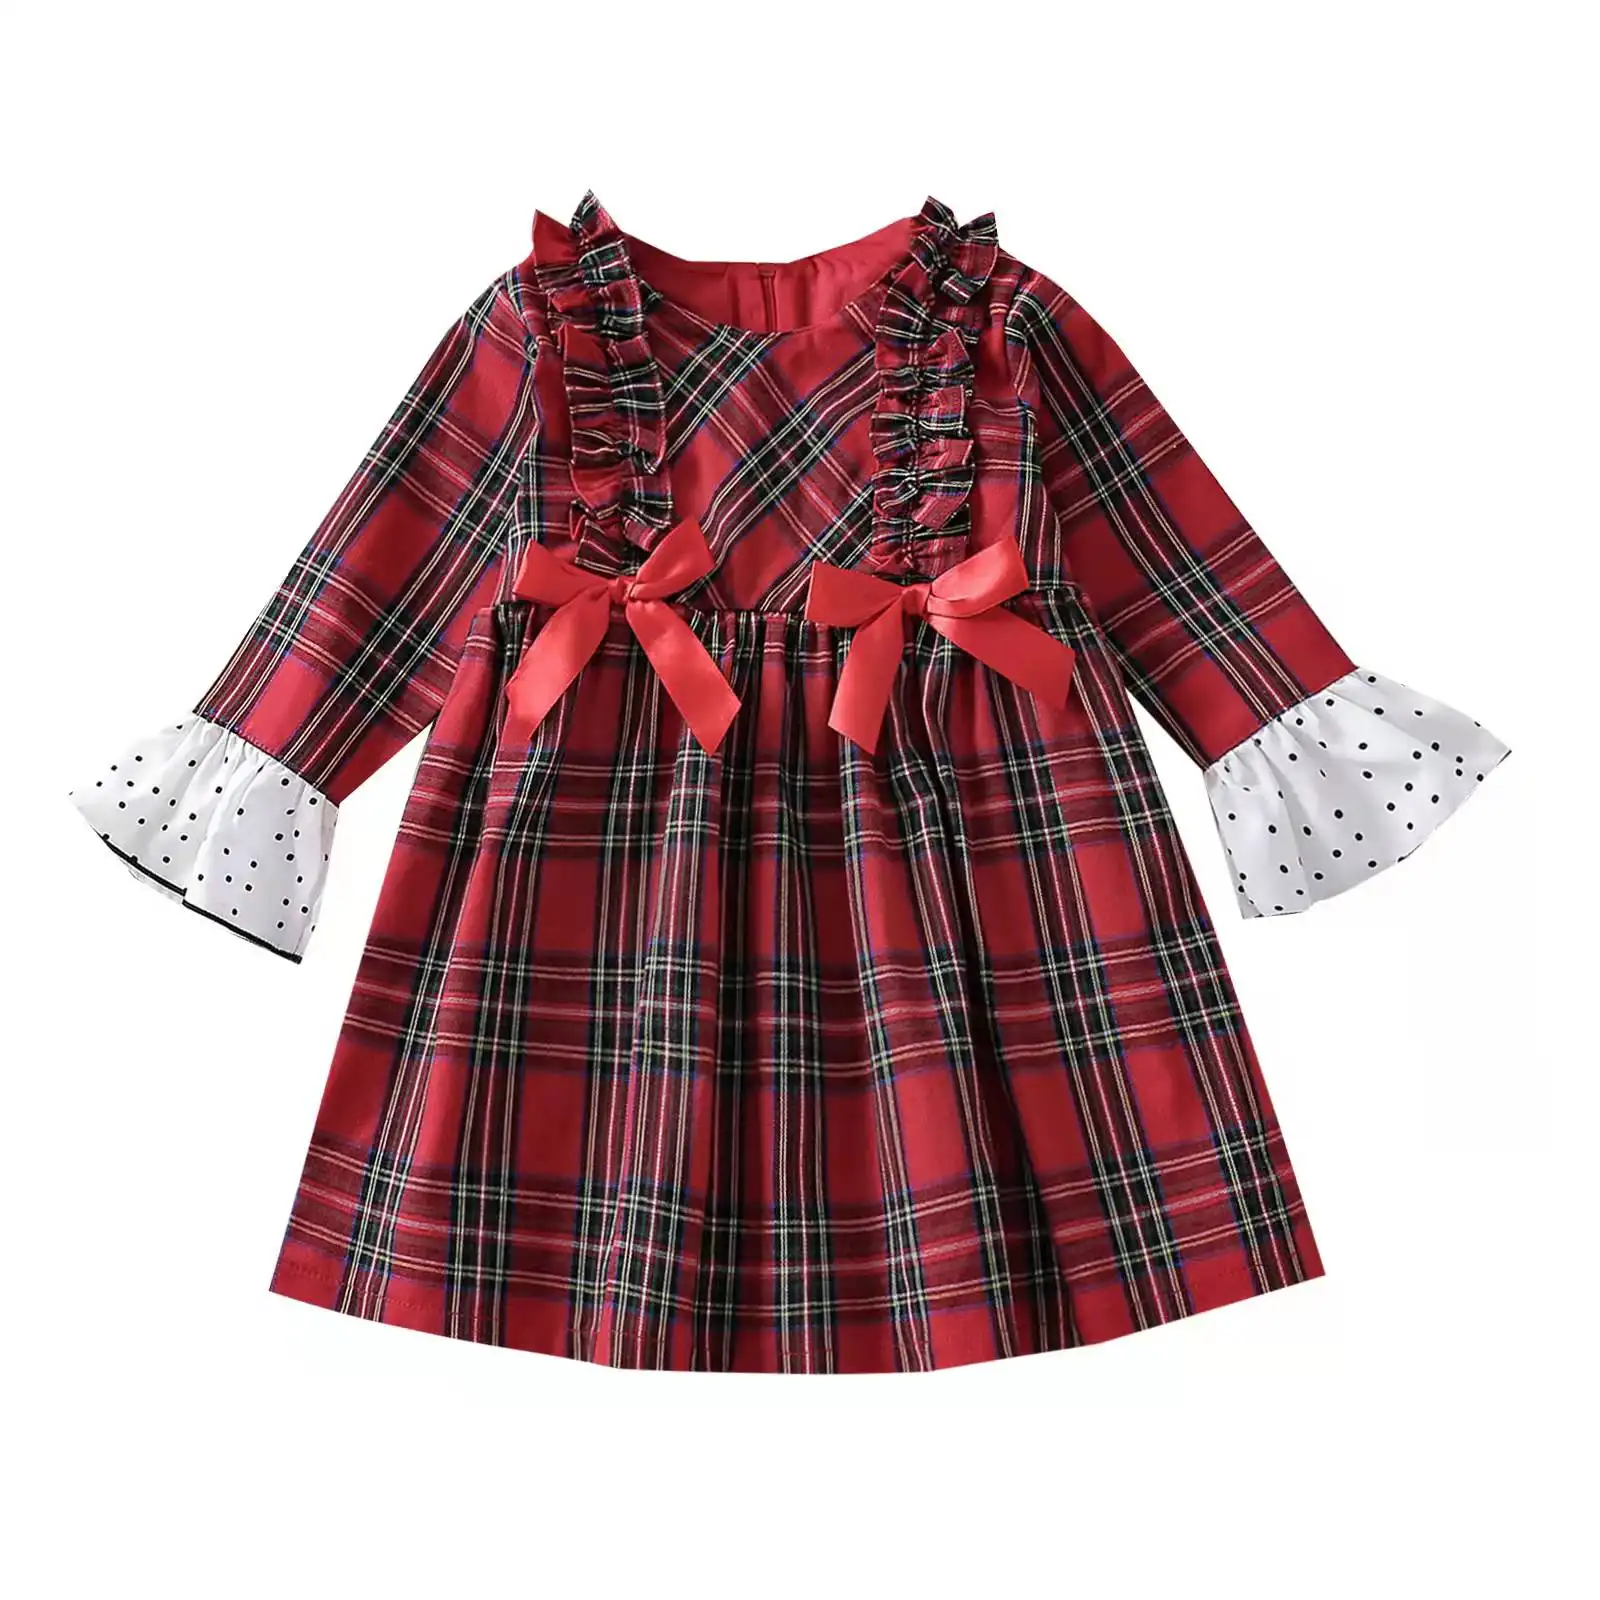 Little Kids Red Check Dresses Beautiful Bow Tie Christmas Ruffles Baby Girls Long Dresses With Lace Trims